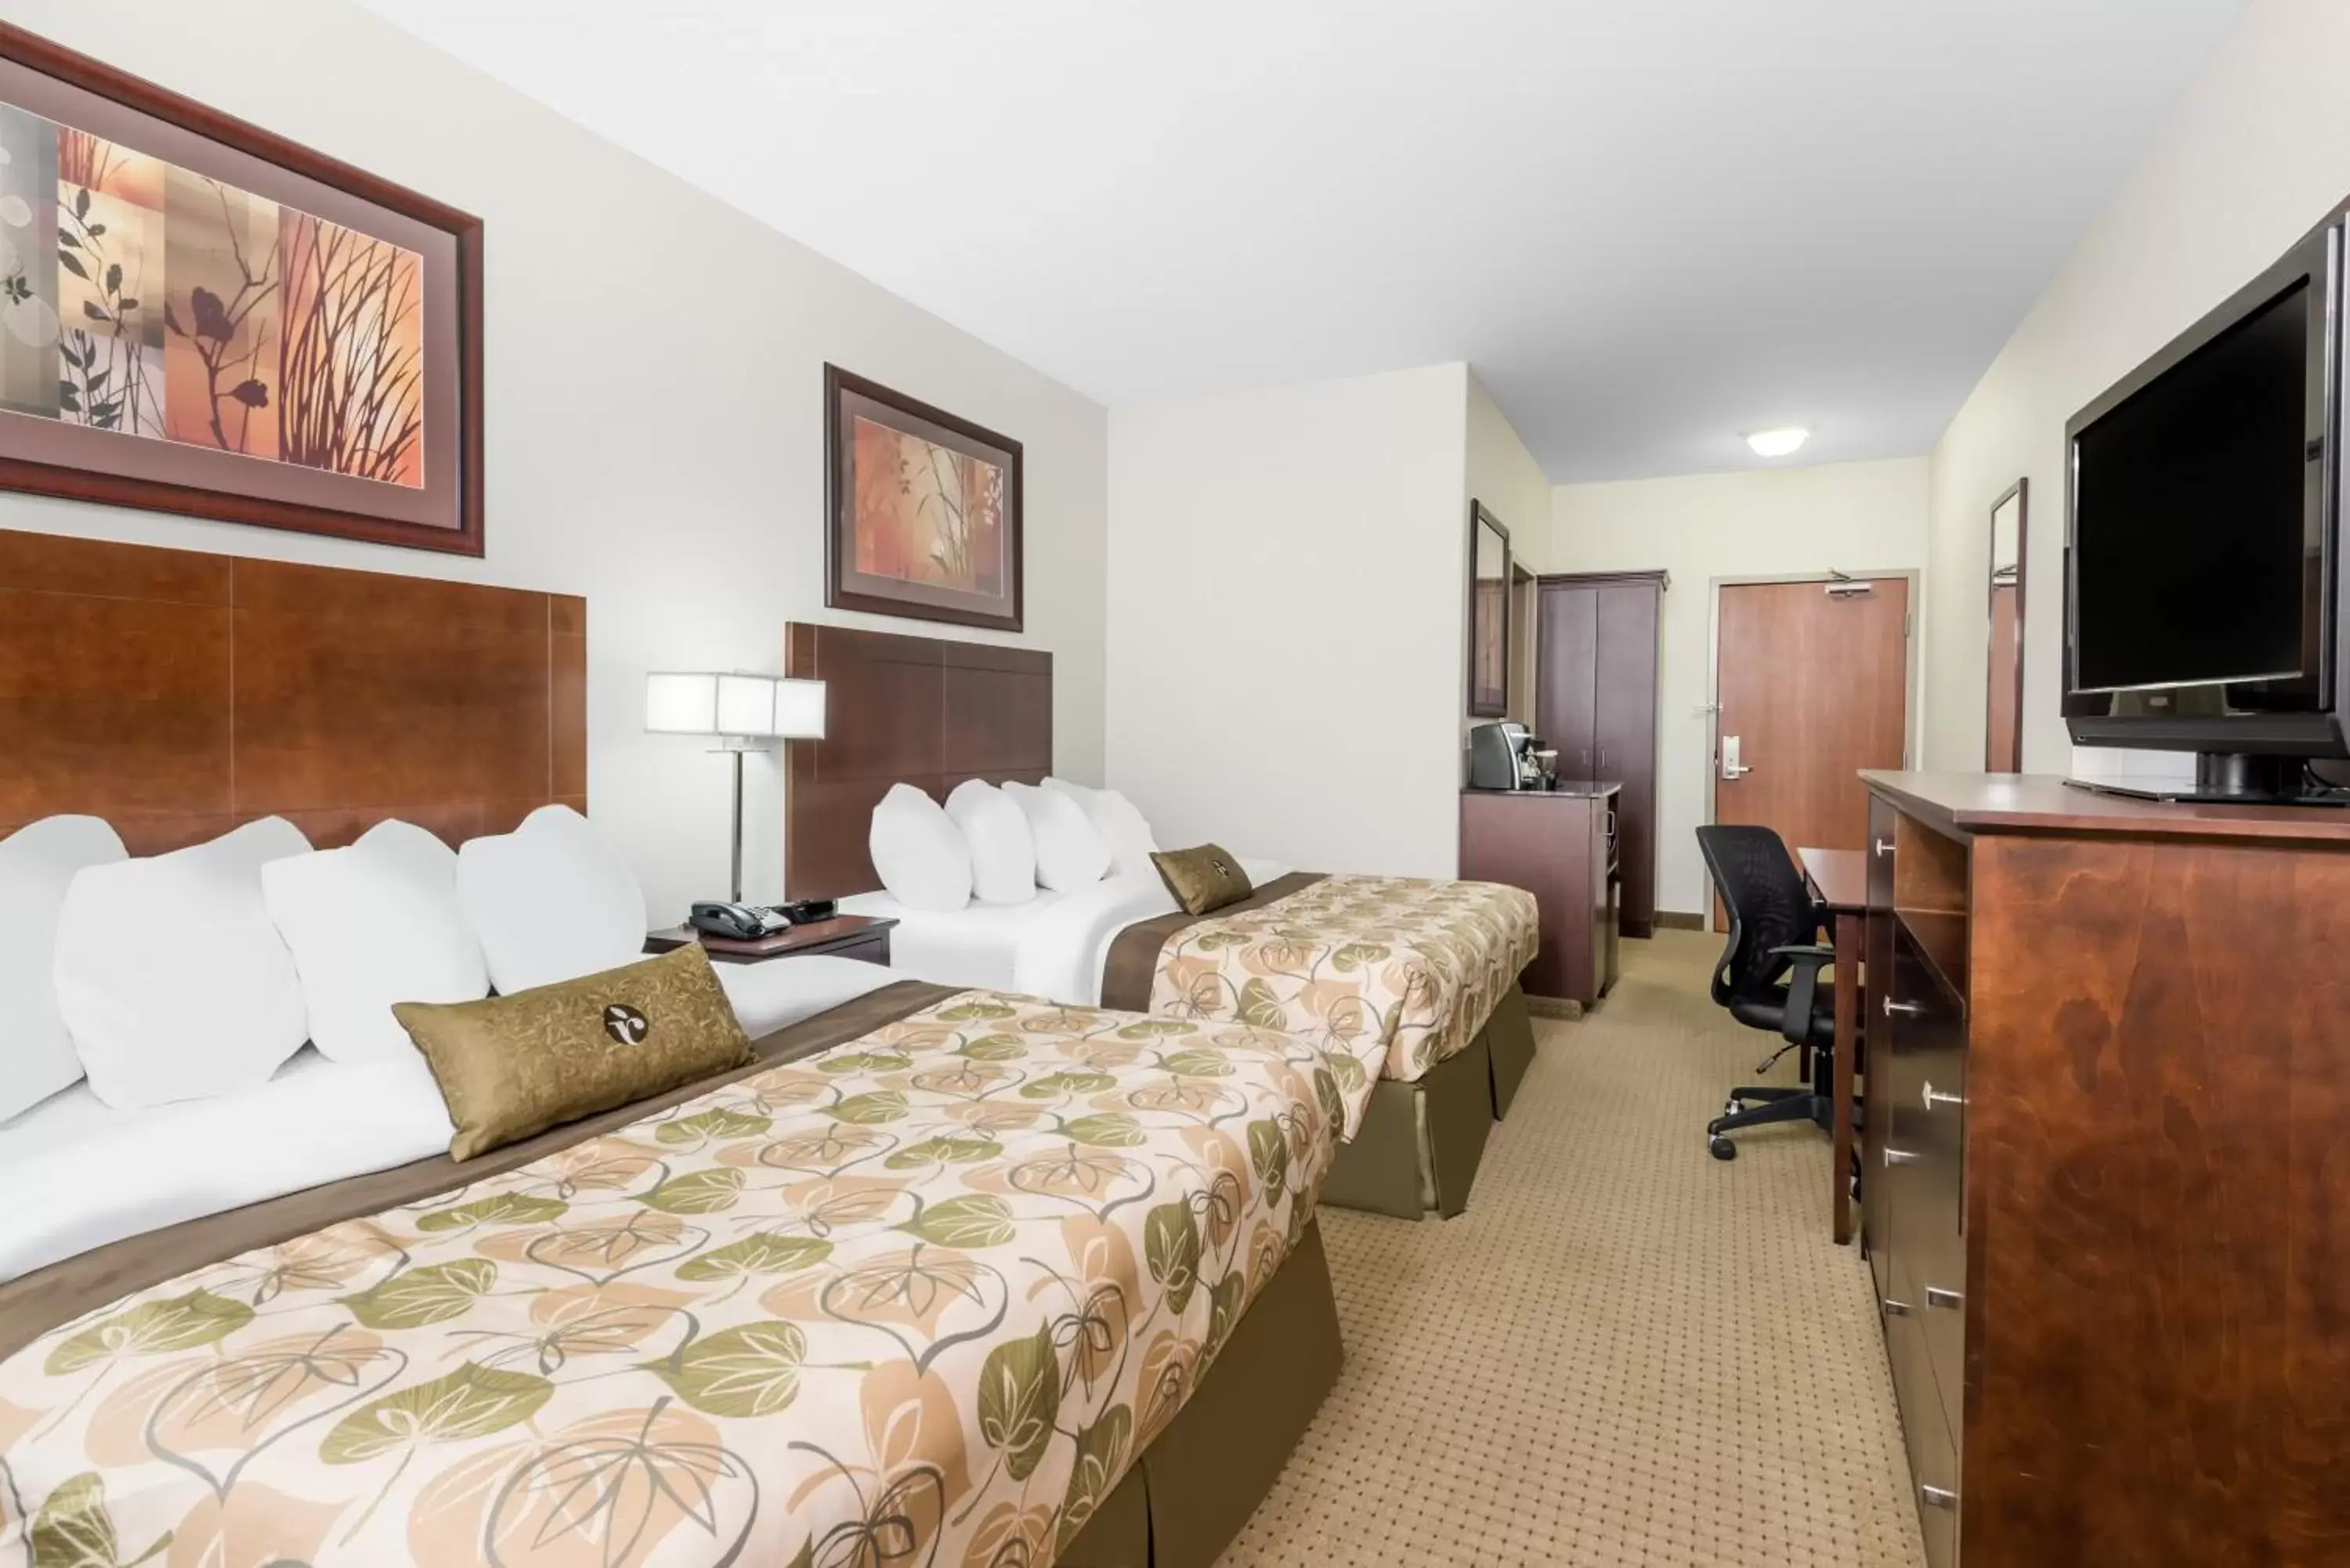 Bed, Room Photo in Ramada by Wyndham Olds